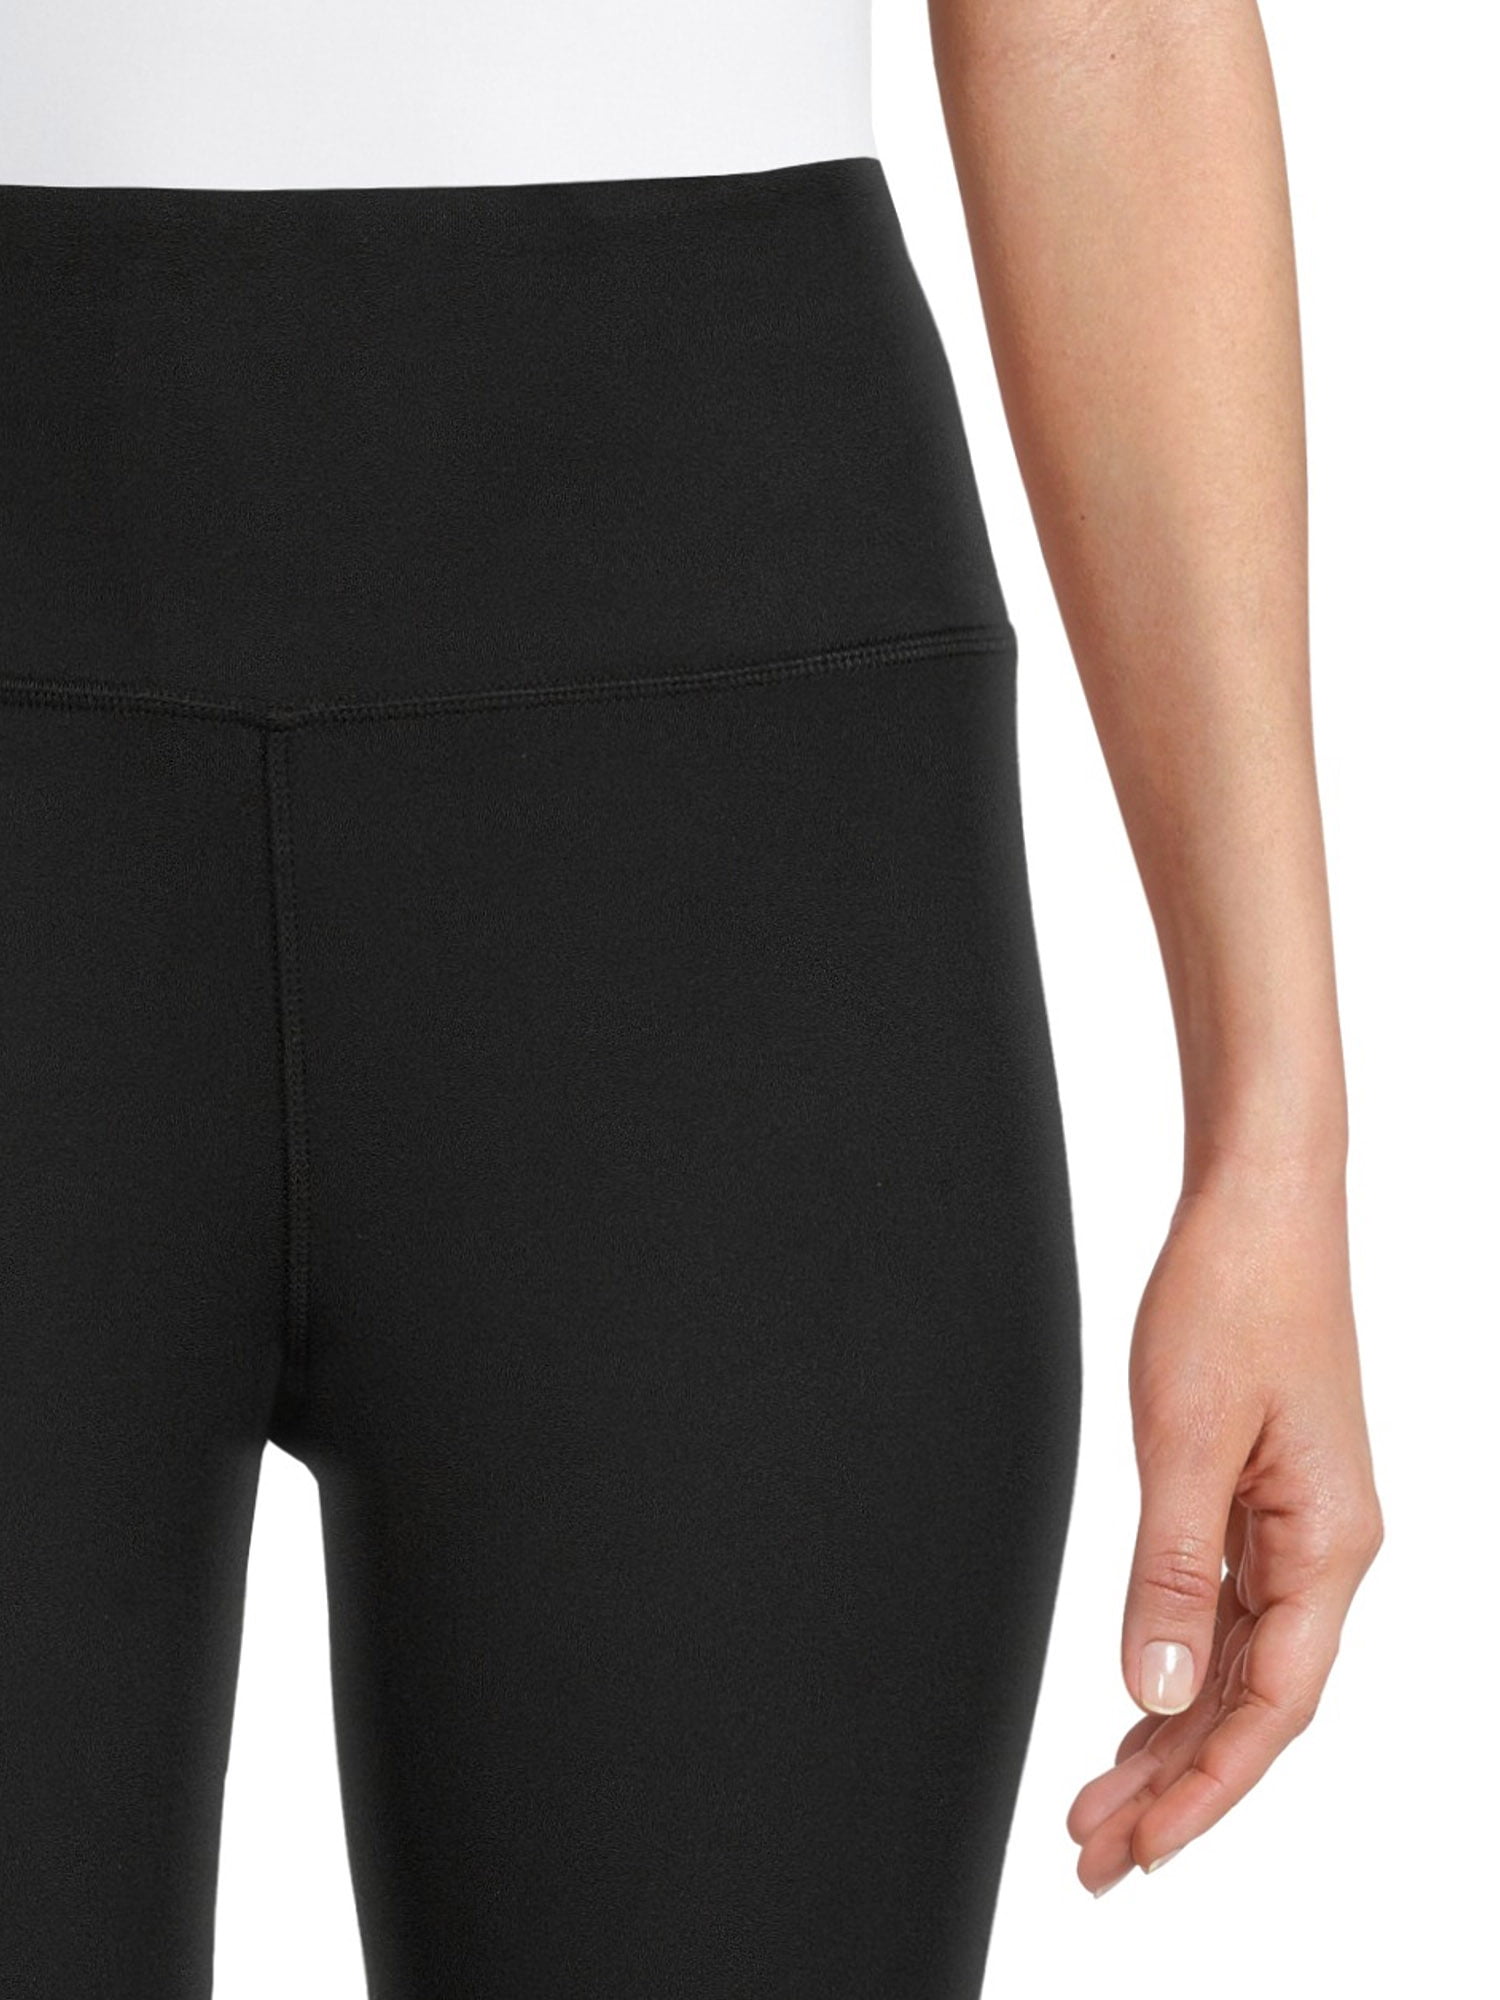 Jockey Juniors Black Leggings (Pack of 2) - Style Number - (Ag18): Buy  Jockey Juniors Black Leggings (Pack of 2) - Style Number - (Ag18) Online at  Best Price in India | Nykaa